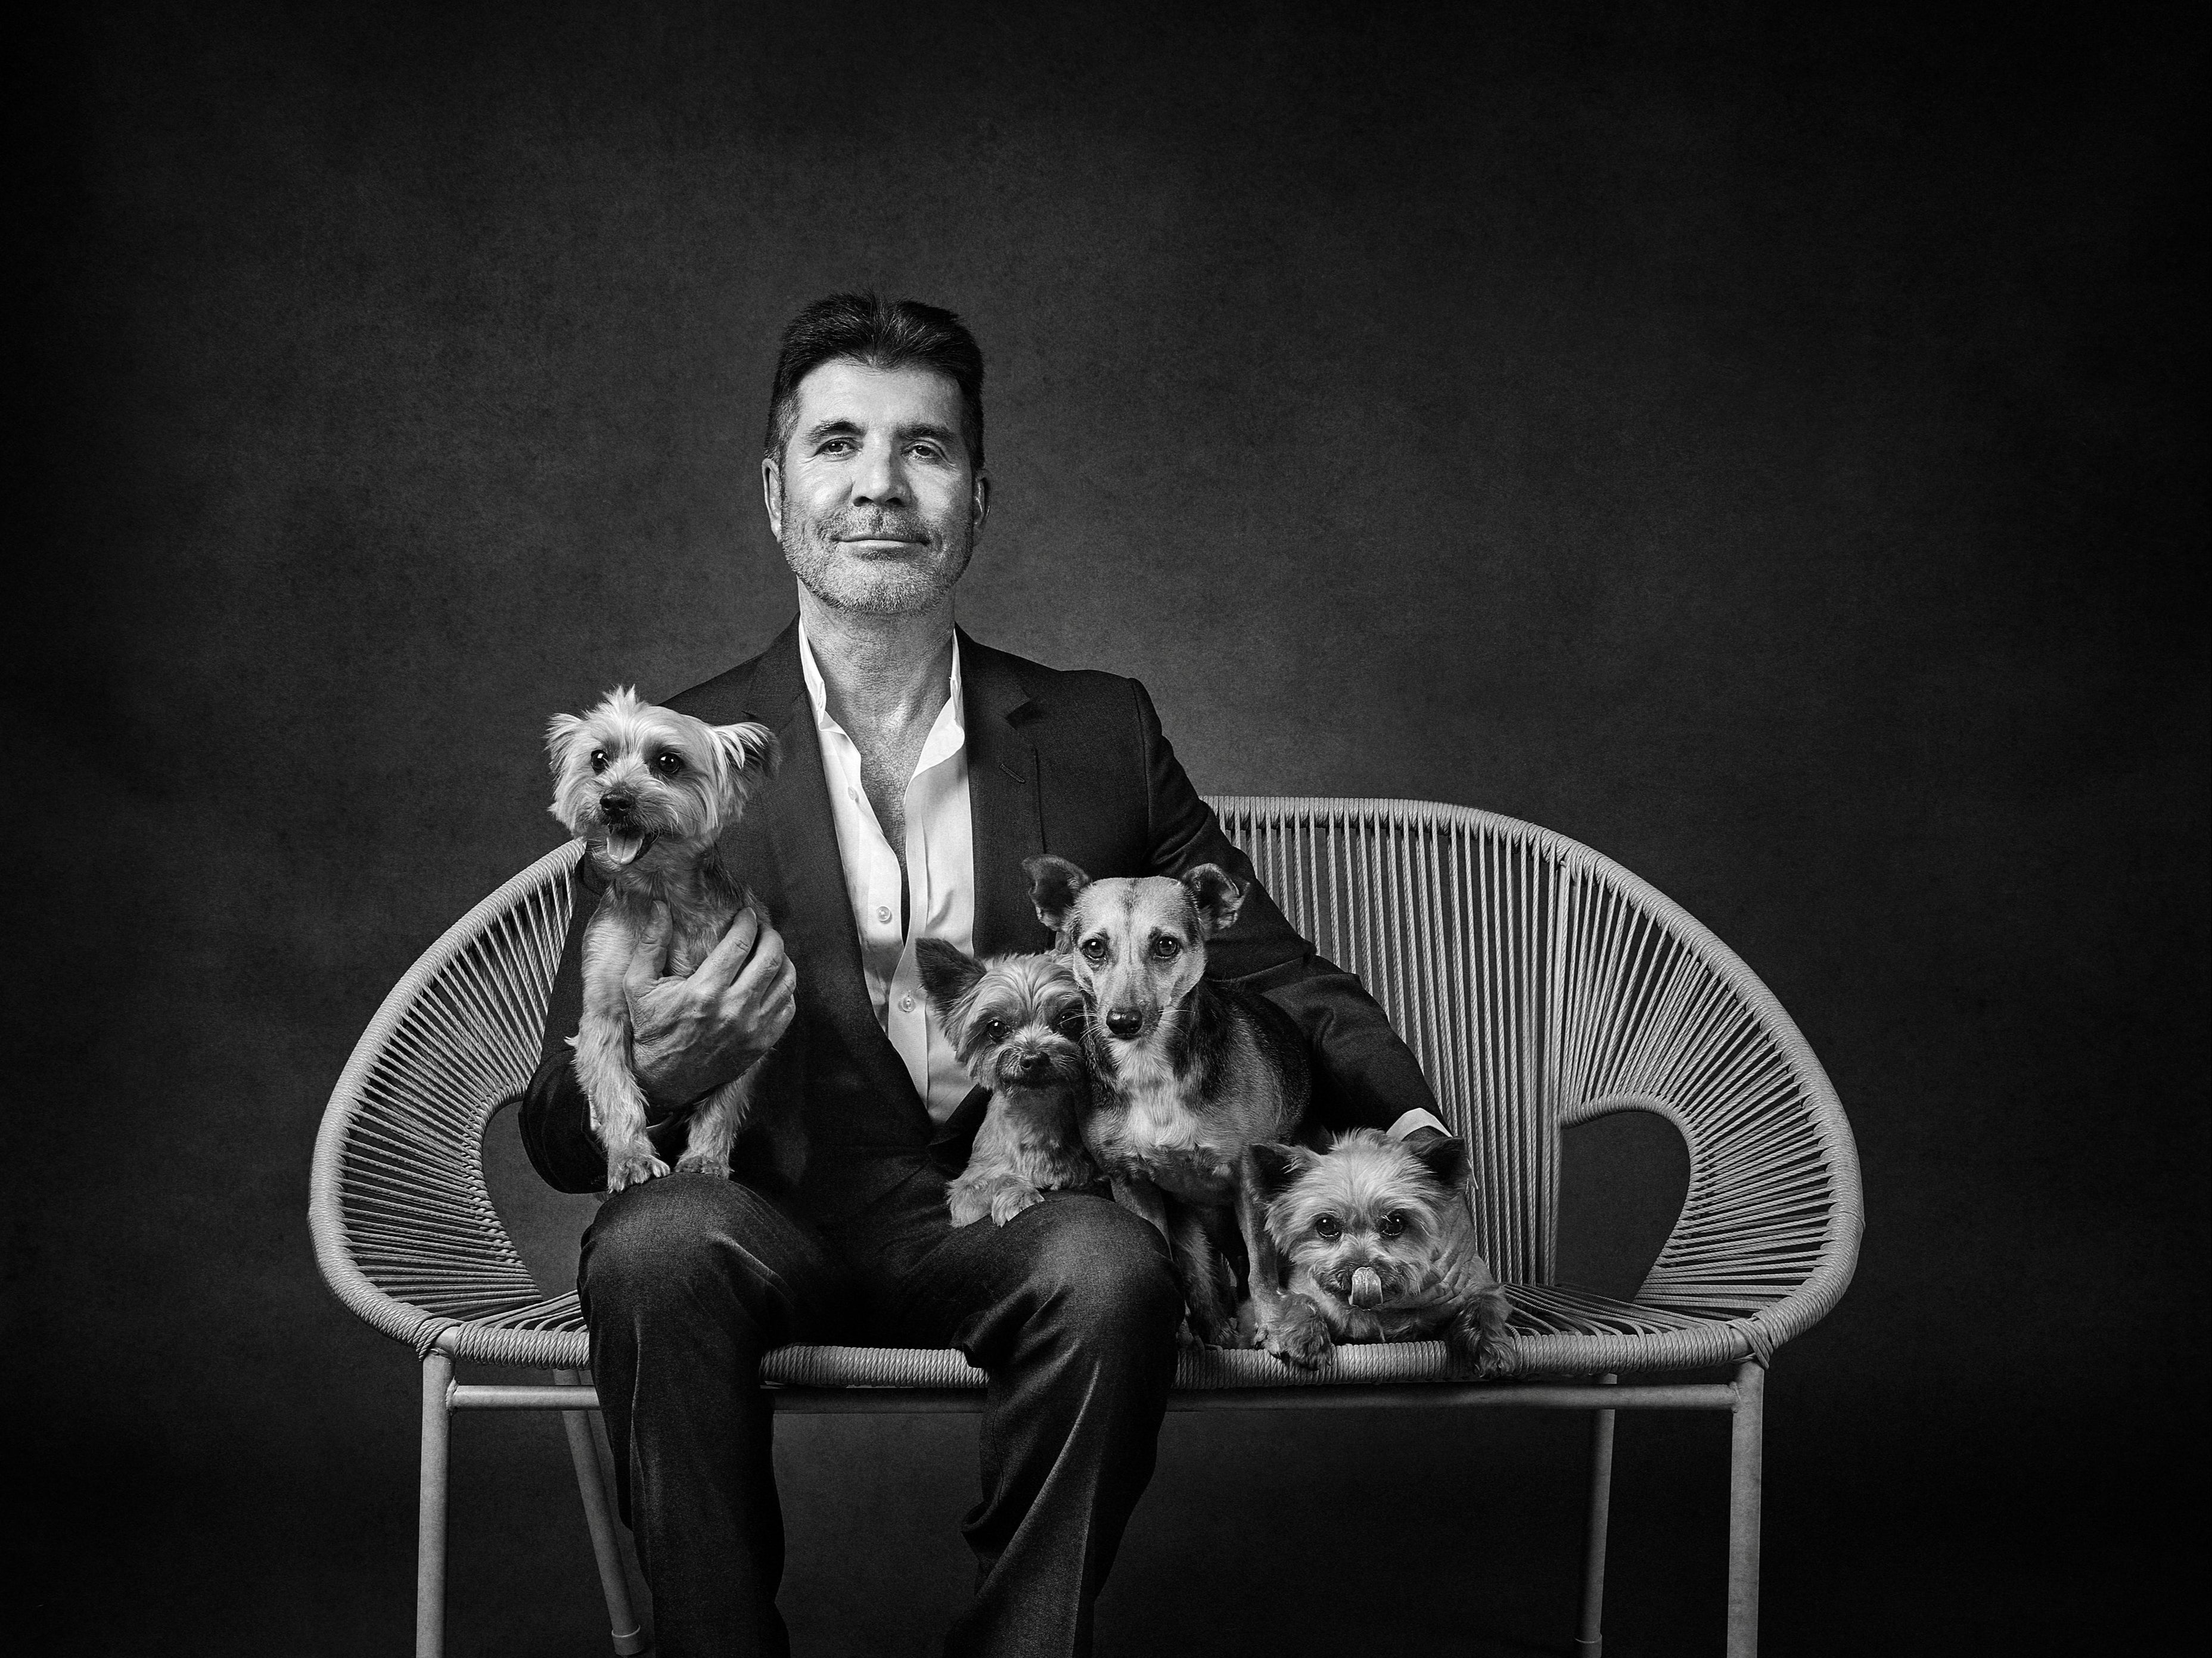 Simon Cowell with his dogs Squiddly, Diddle, Freddy and Daisy